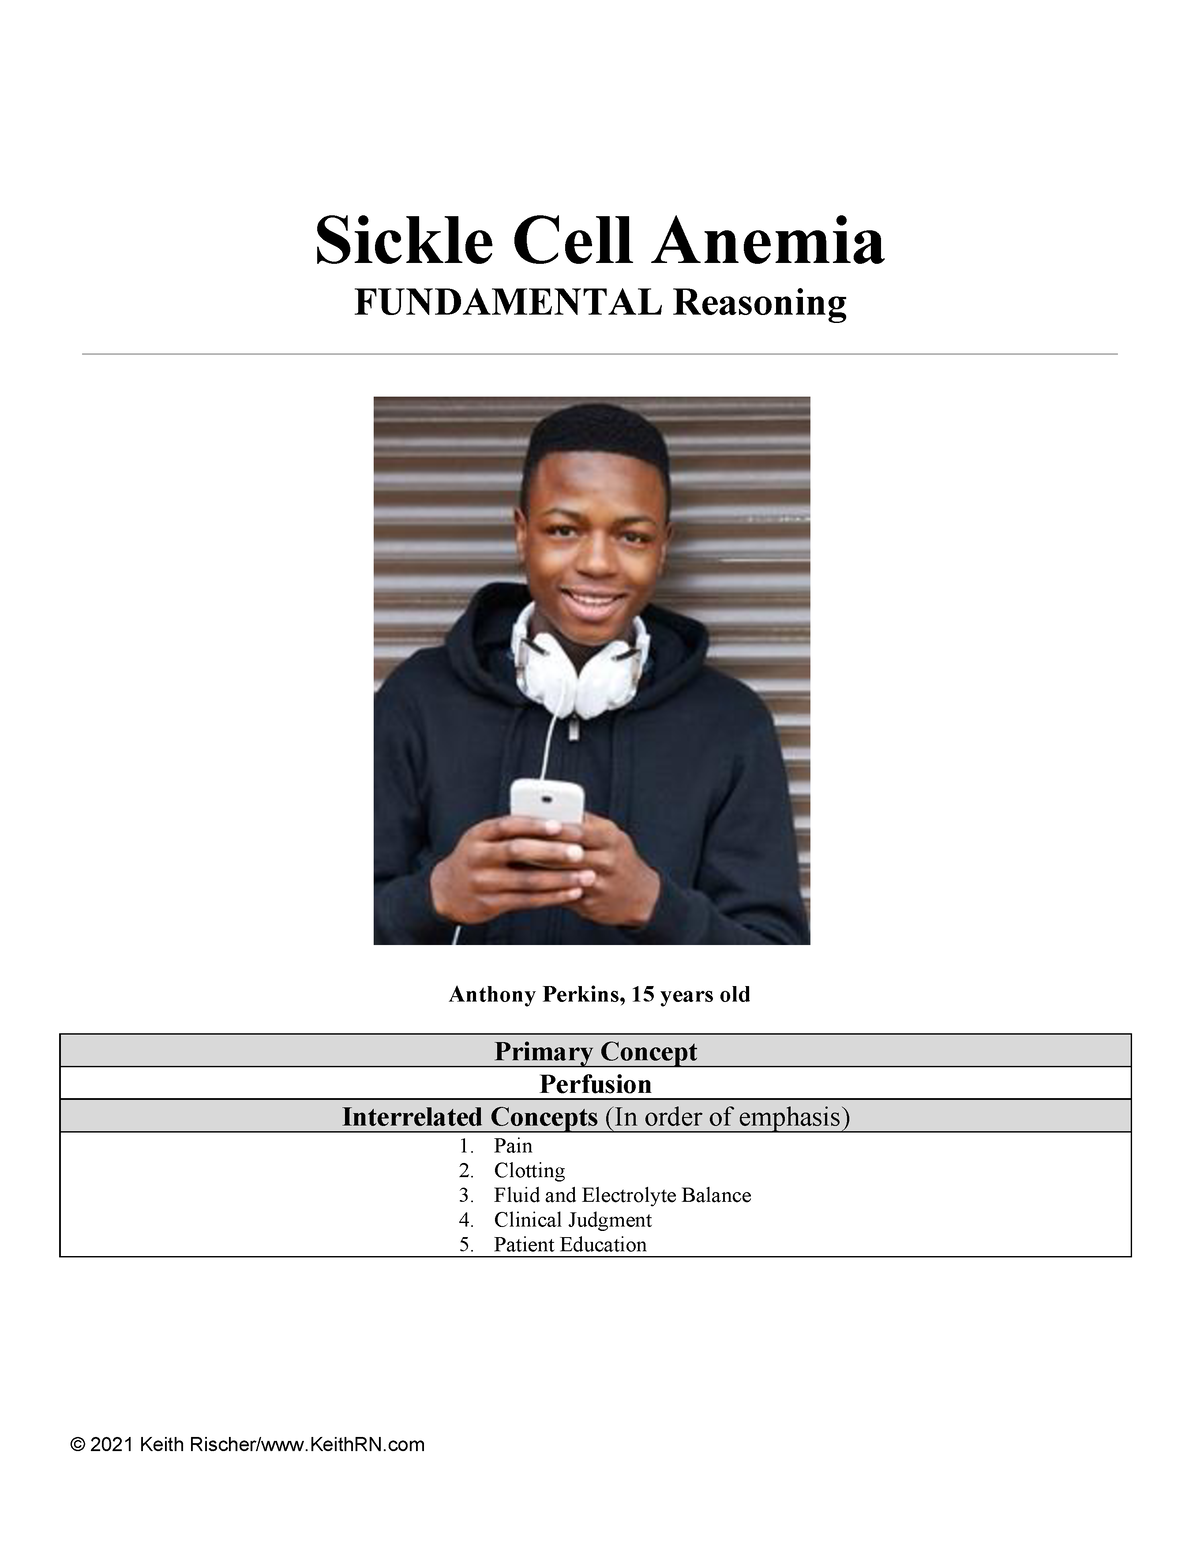 free essay on sickle cell anemia